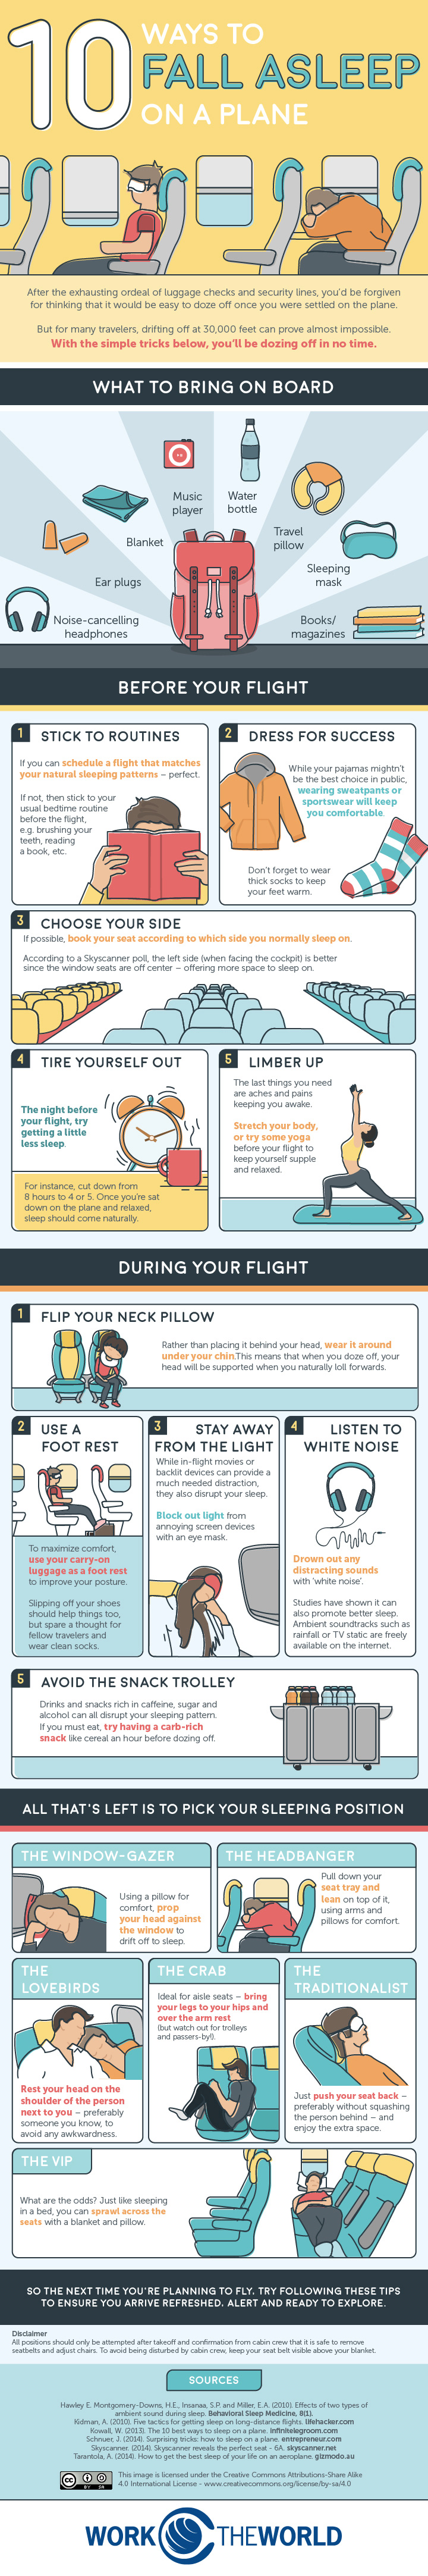 How To Sleep On A Plane In Cattle Class [Infographic]